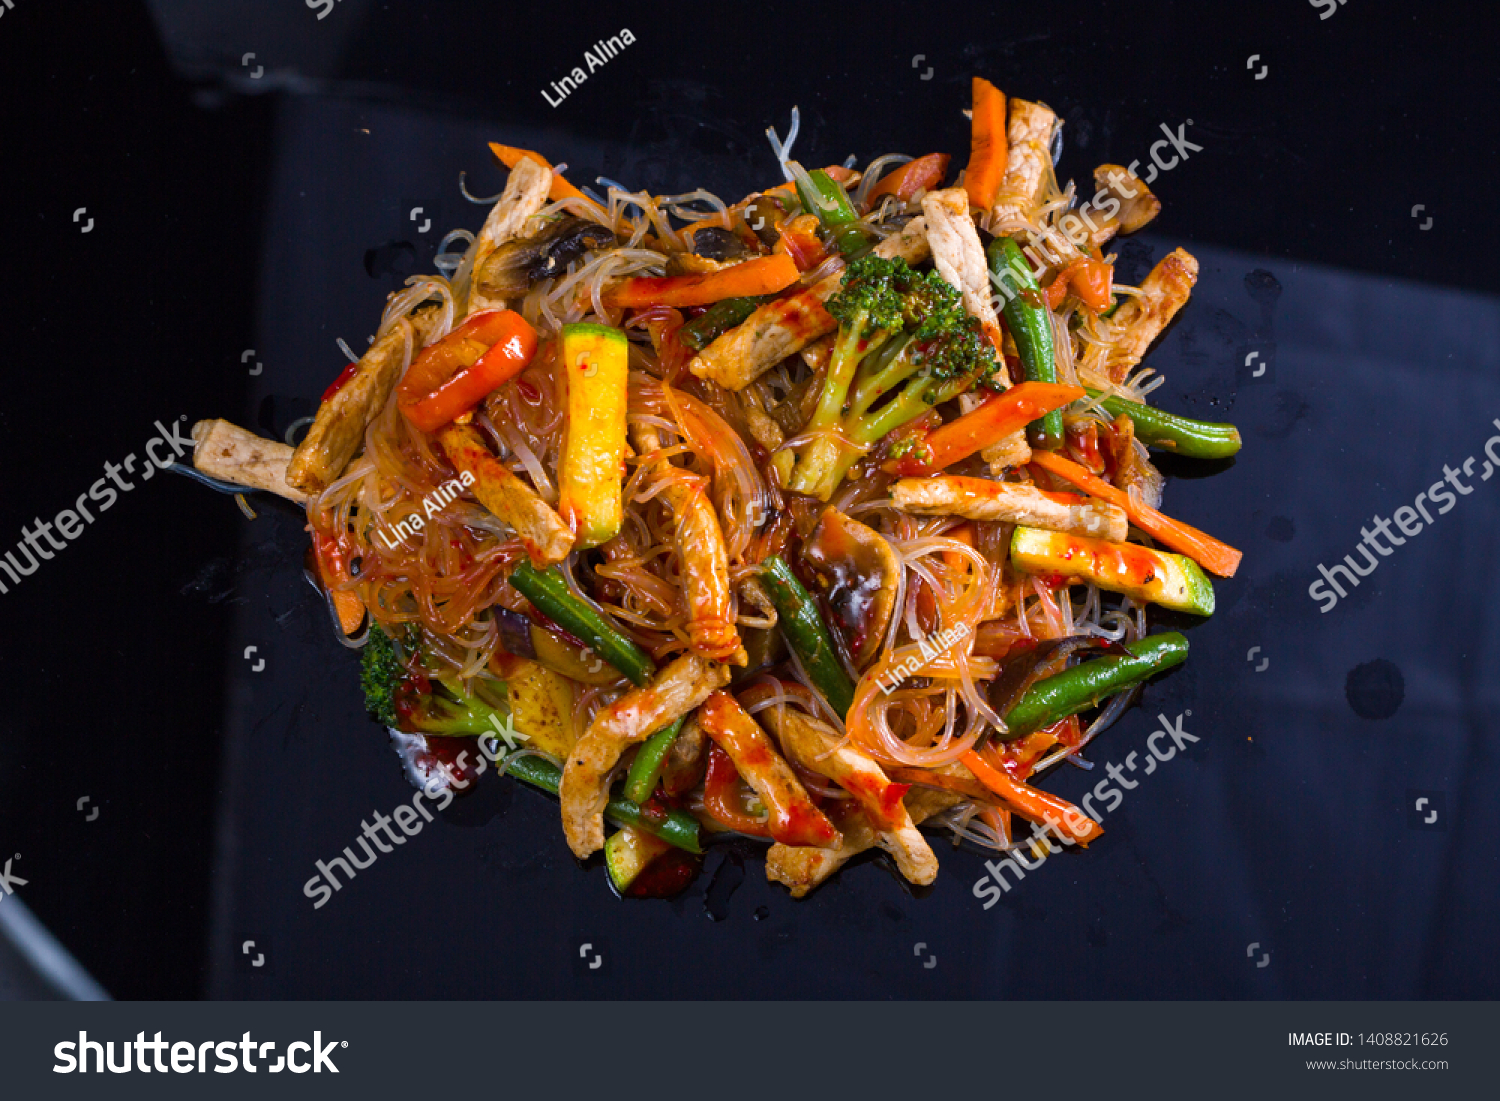 Asian vegetables and beef chicken meat noodles. Restaurant menu #1408821626